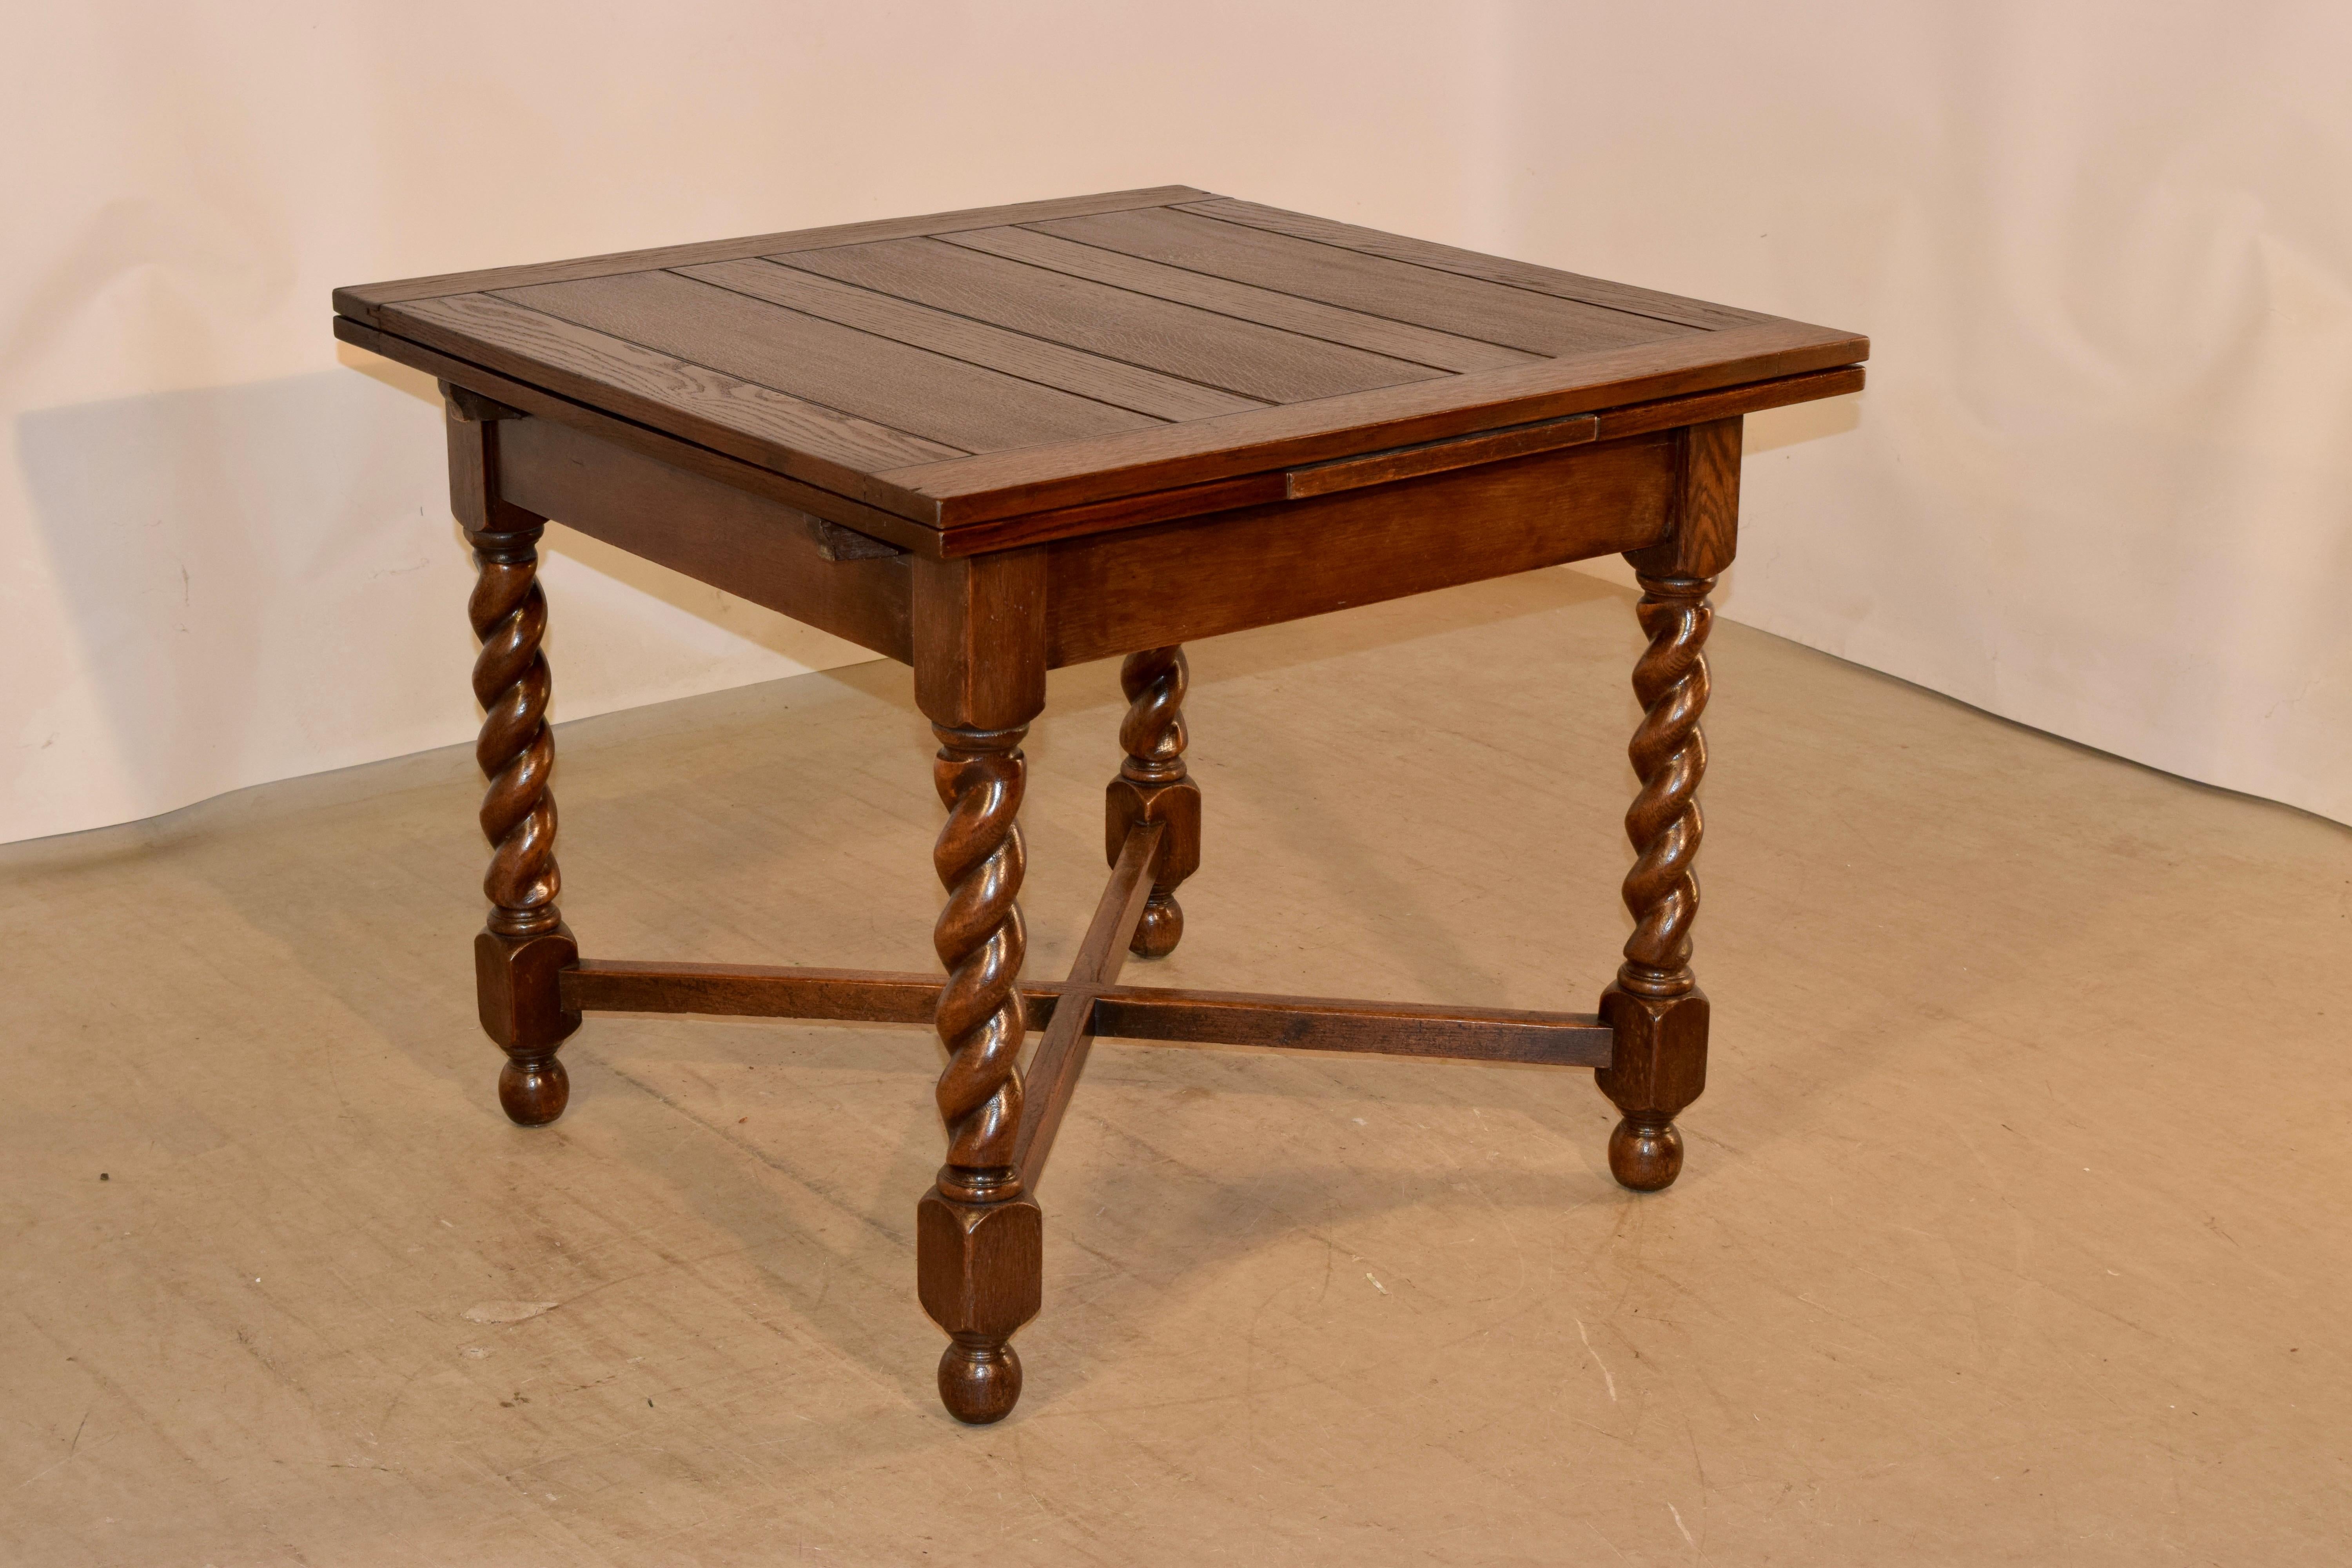 Circa 1900 oak draw-leaf table from England made from oak. The top is paneled, and has two leaves that pull out to extend the length of the table to 59.88 inches. The leaves are paneled as well. The apron is simple and is supported on hand turned